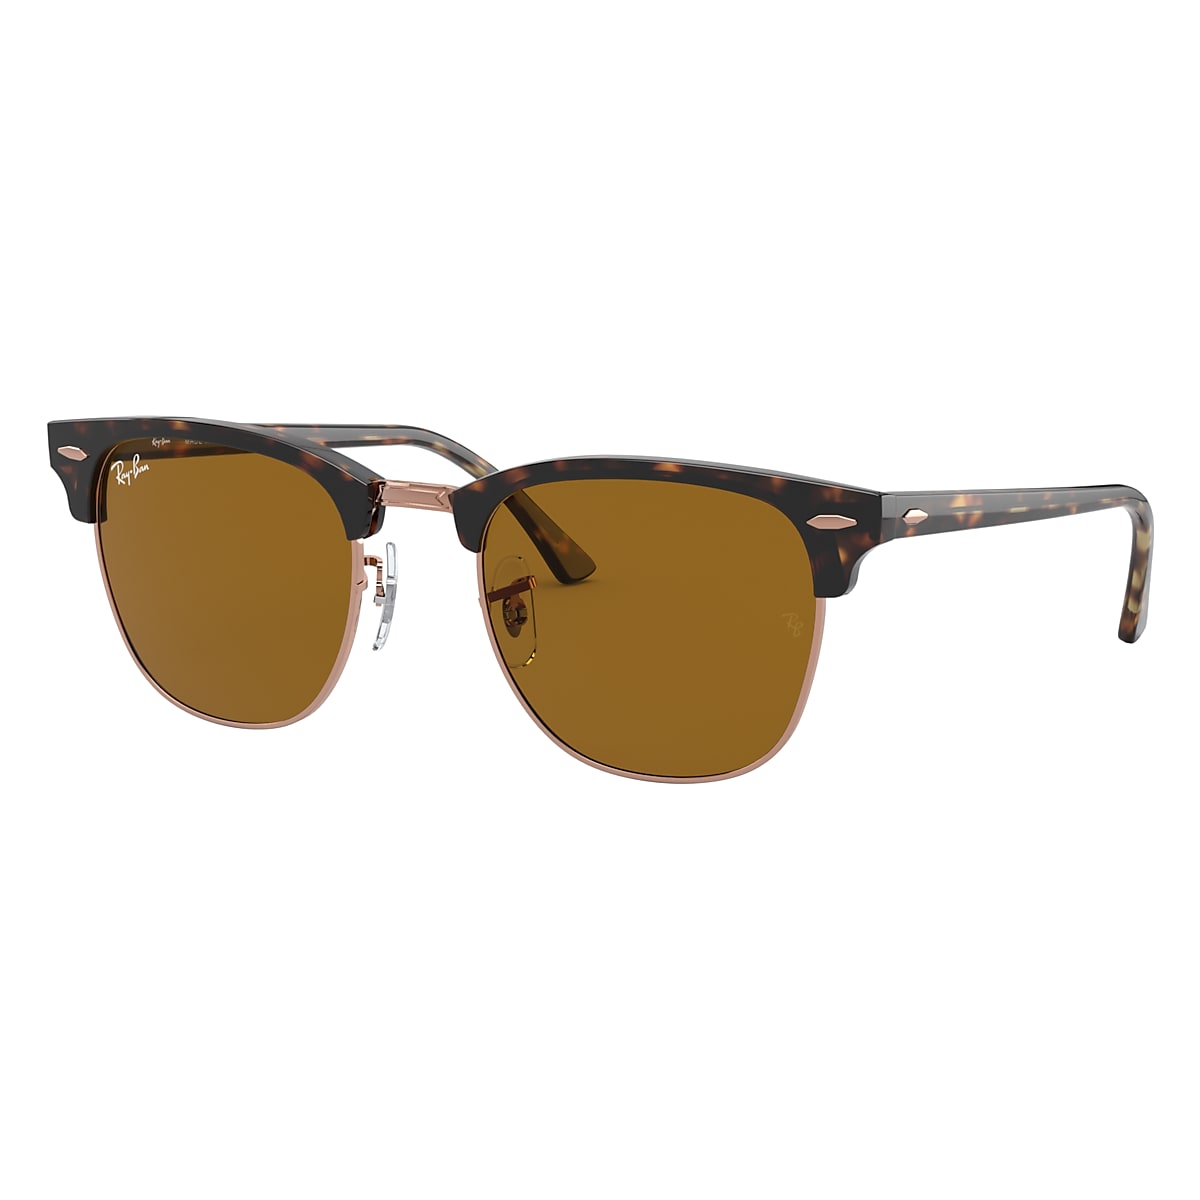 evne Hollow dyd Clubmaster Classic Sunglasses in Havana and Brown - RB3016 | Ray-Ban® US